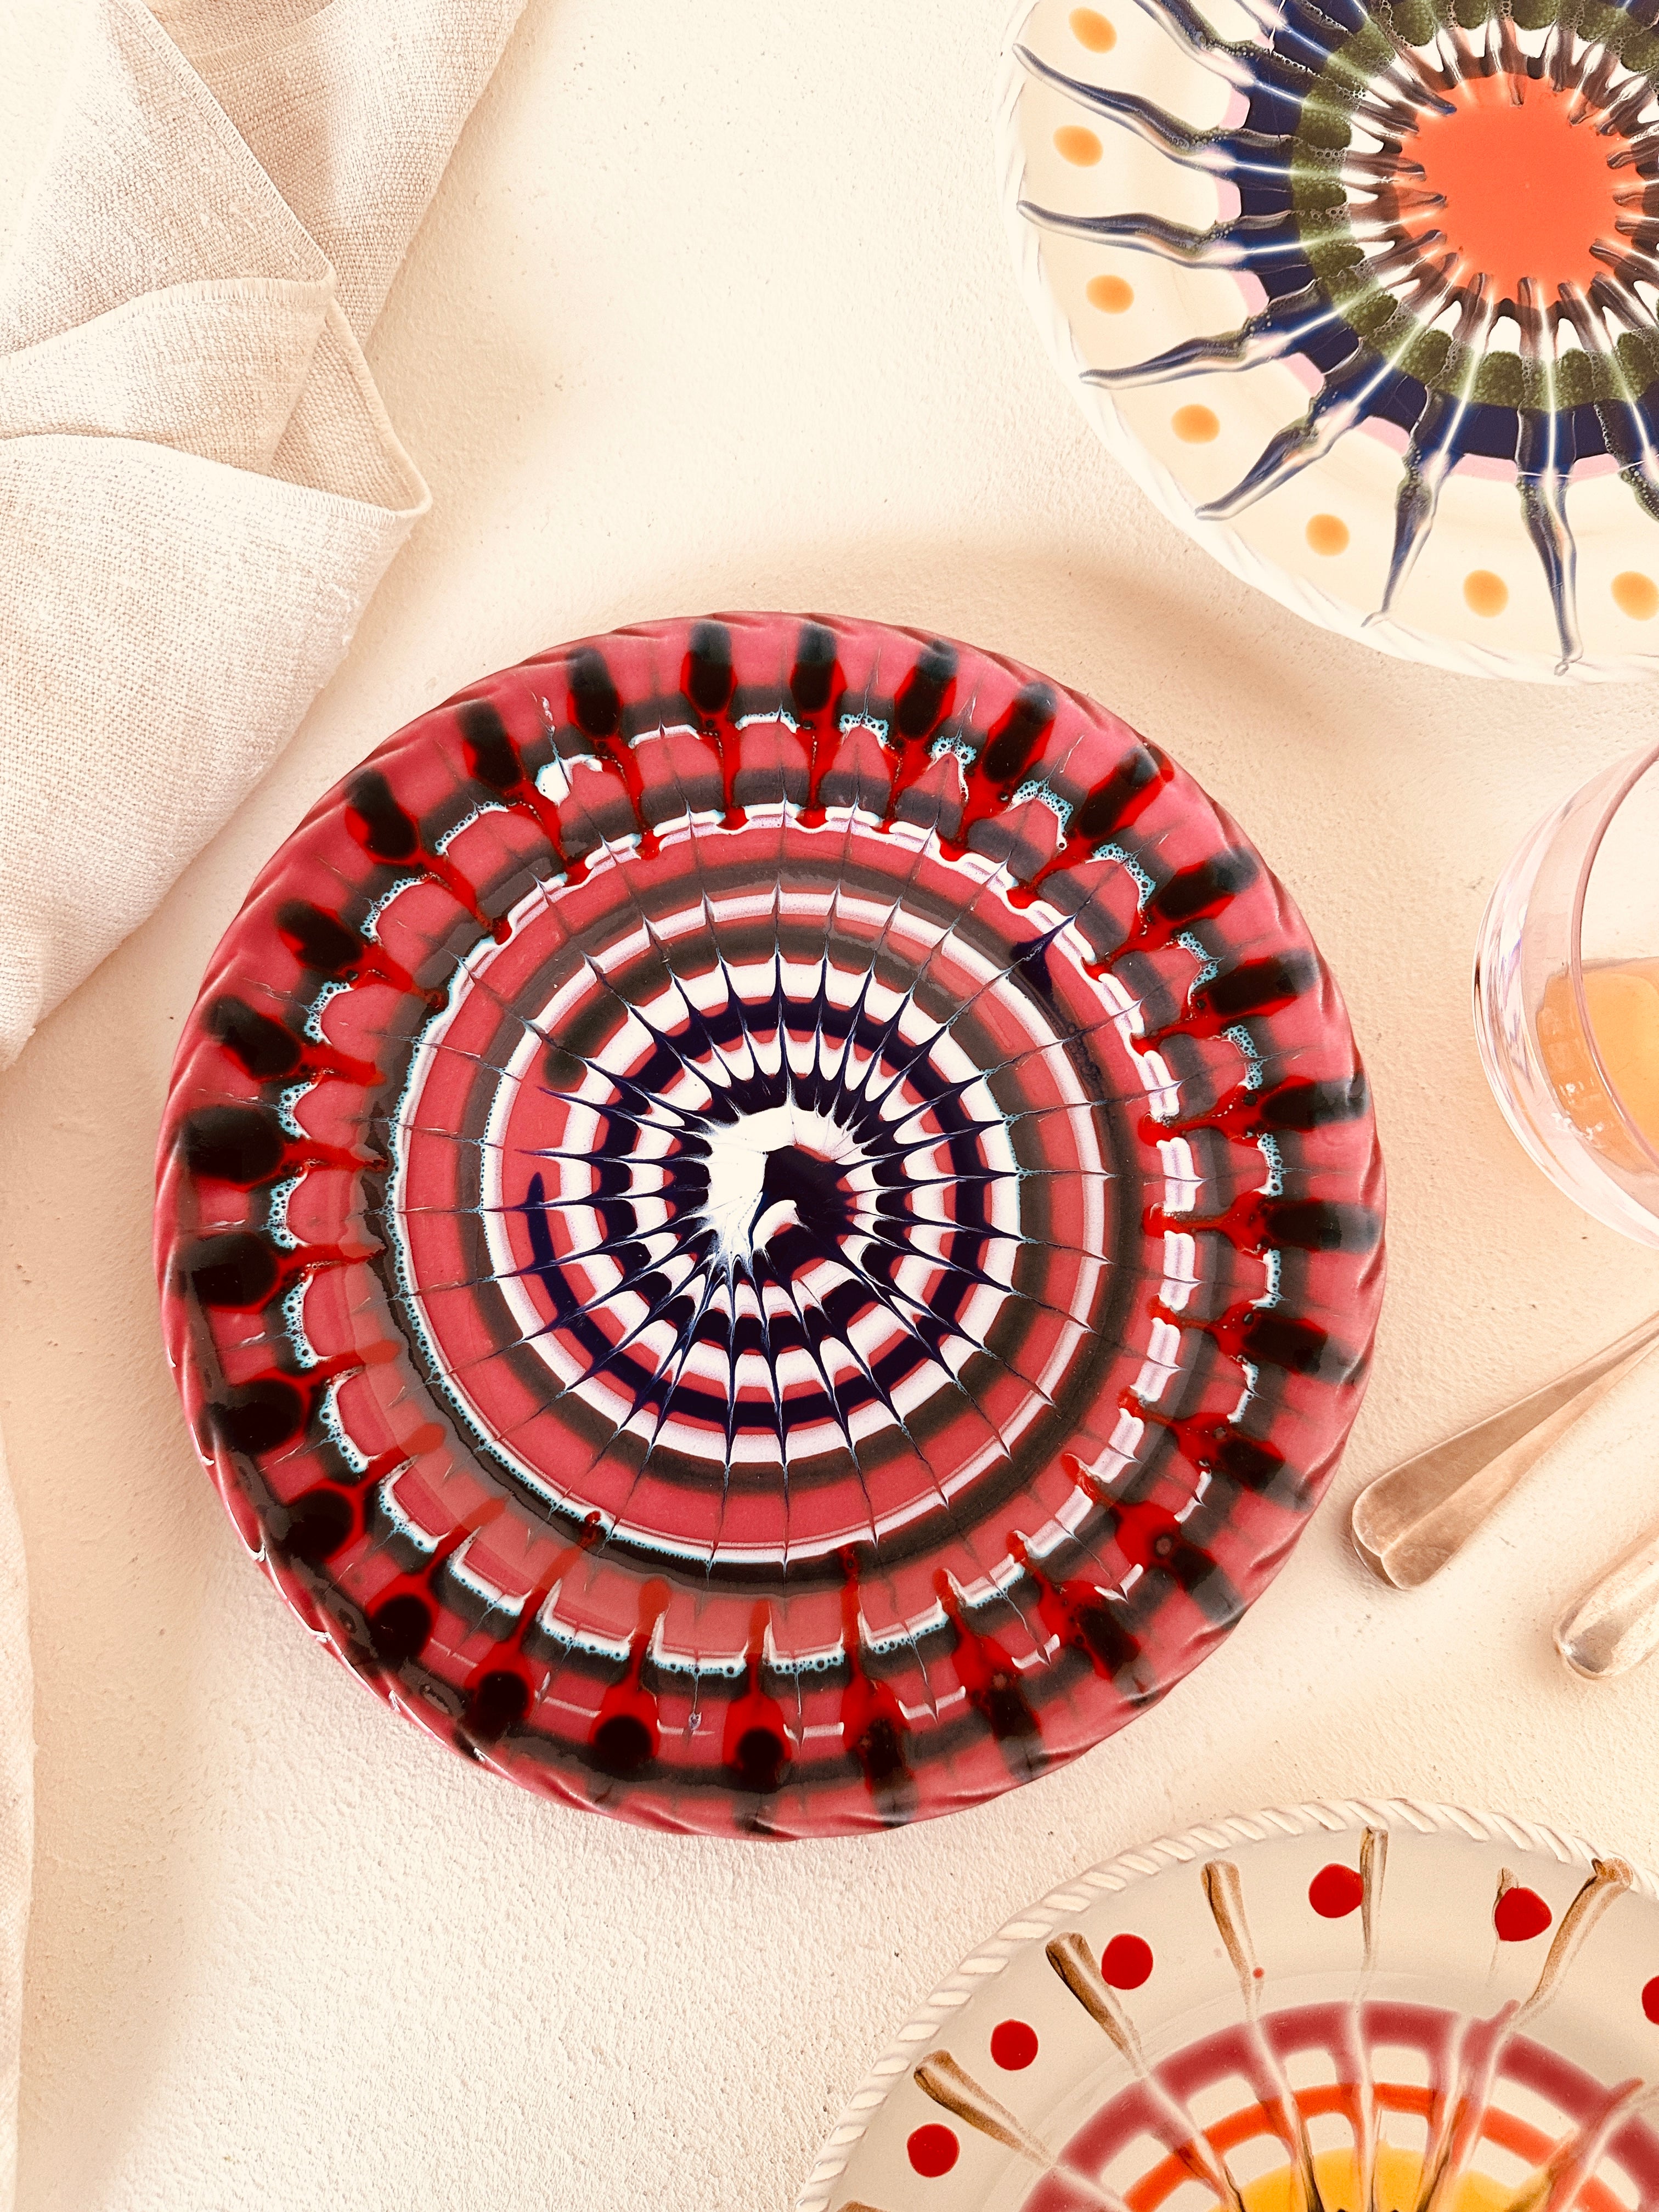 Psychodelic Dinner Plate "Fuxia Classic"